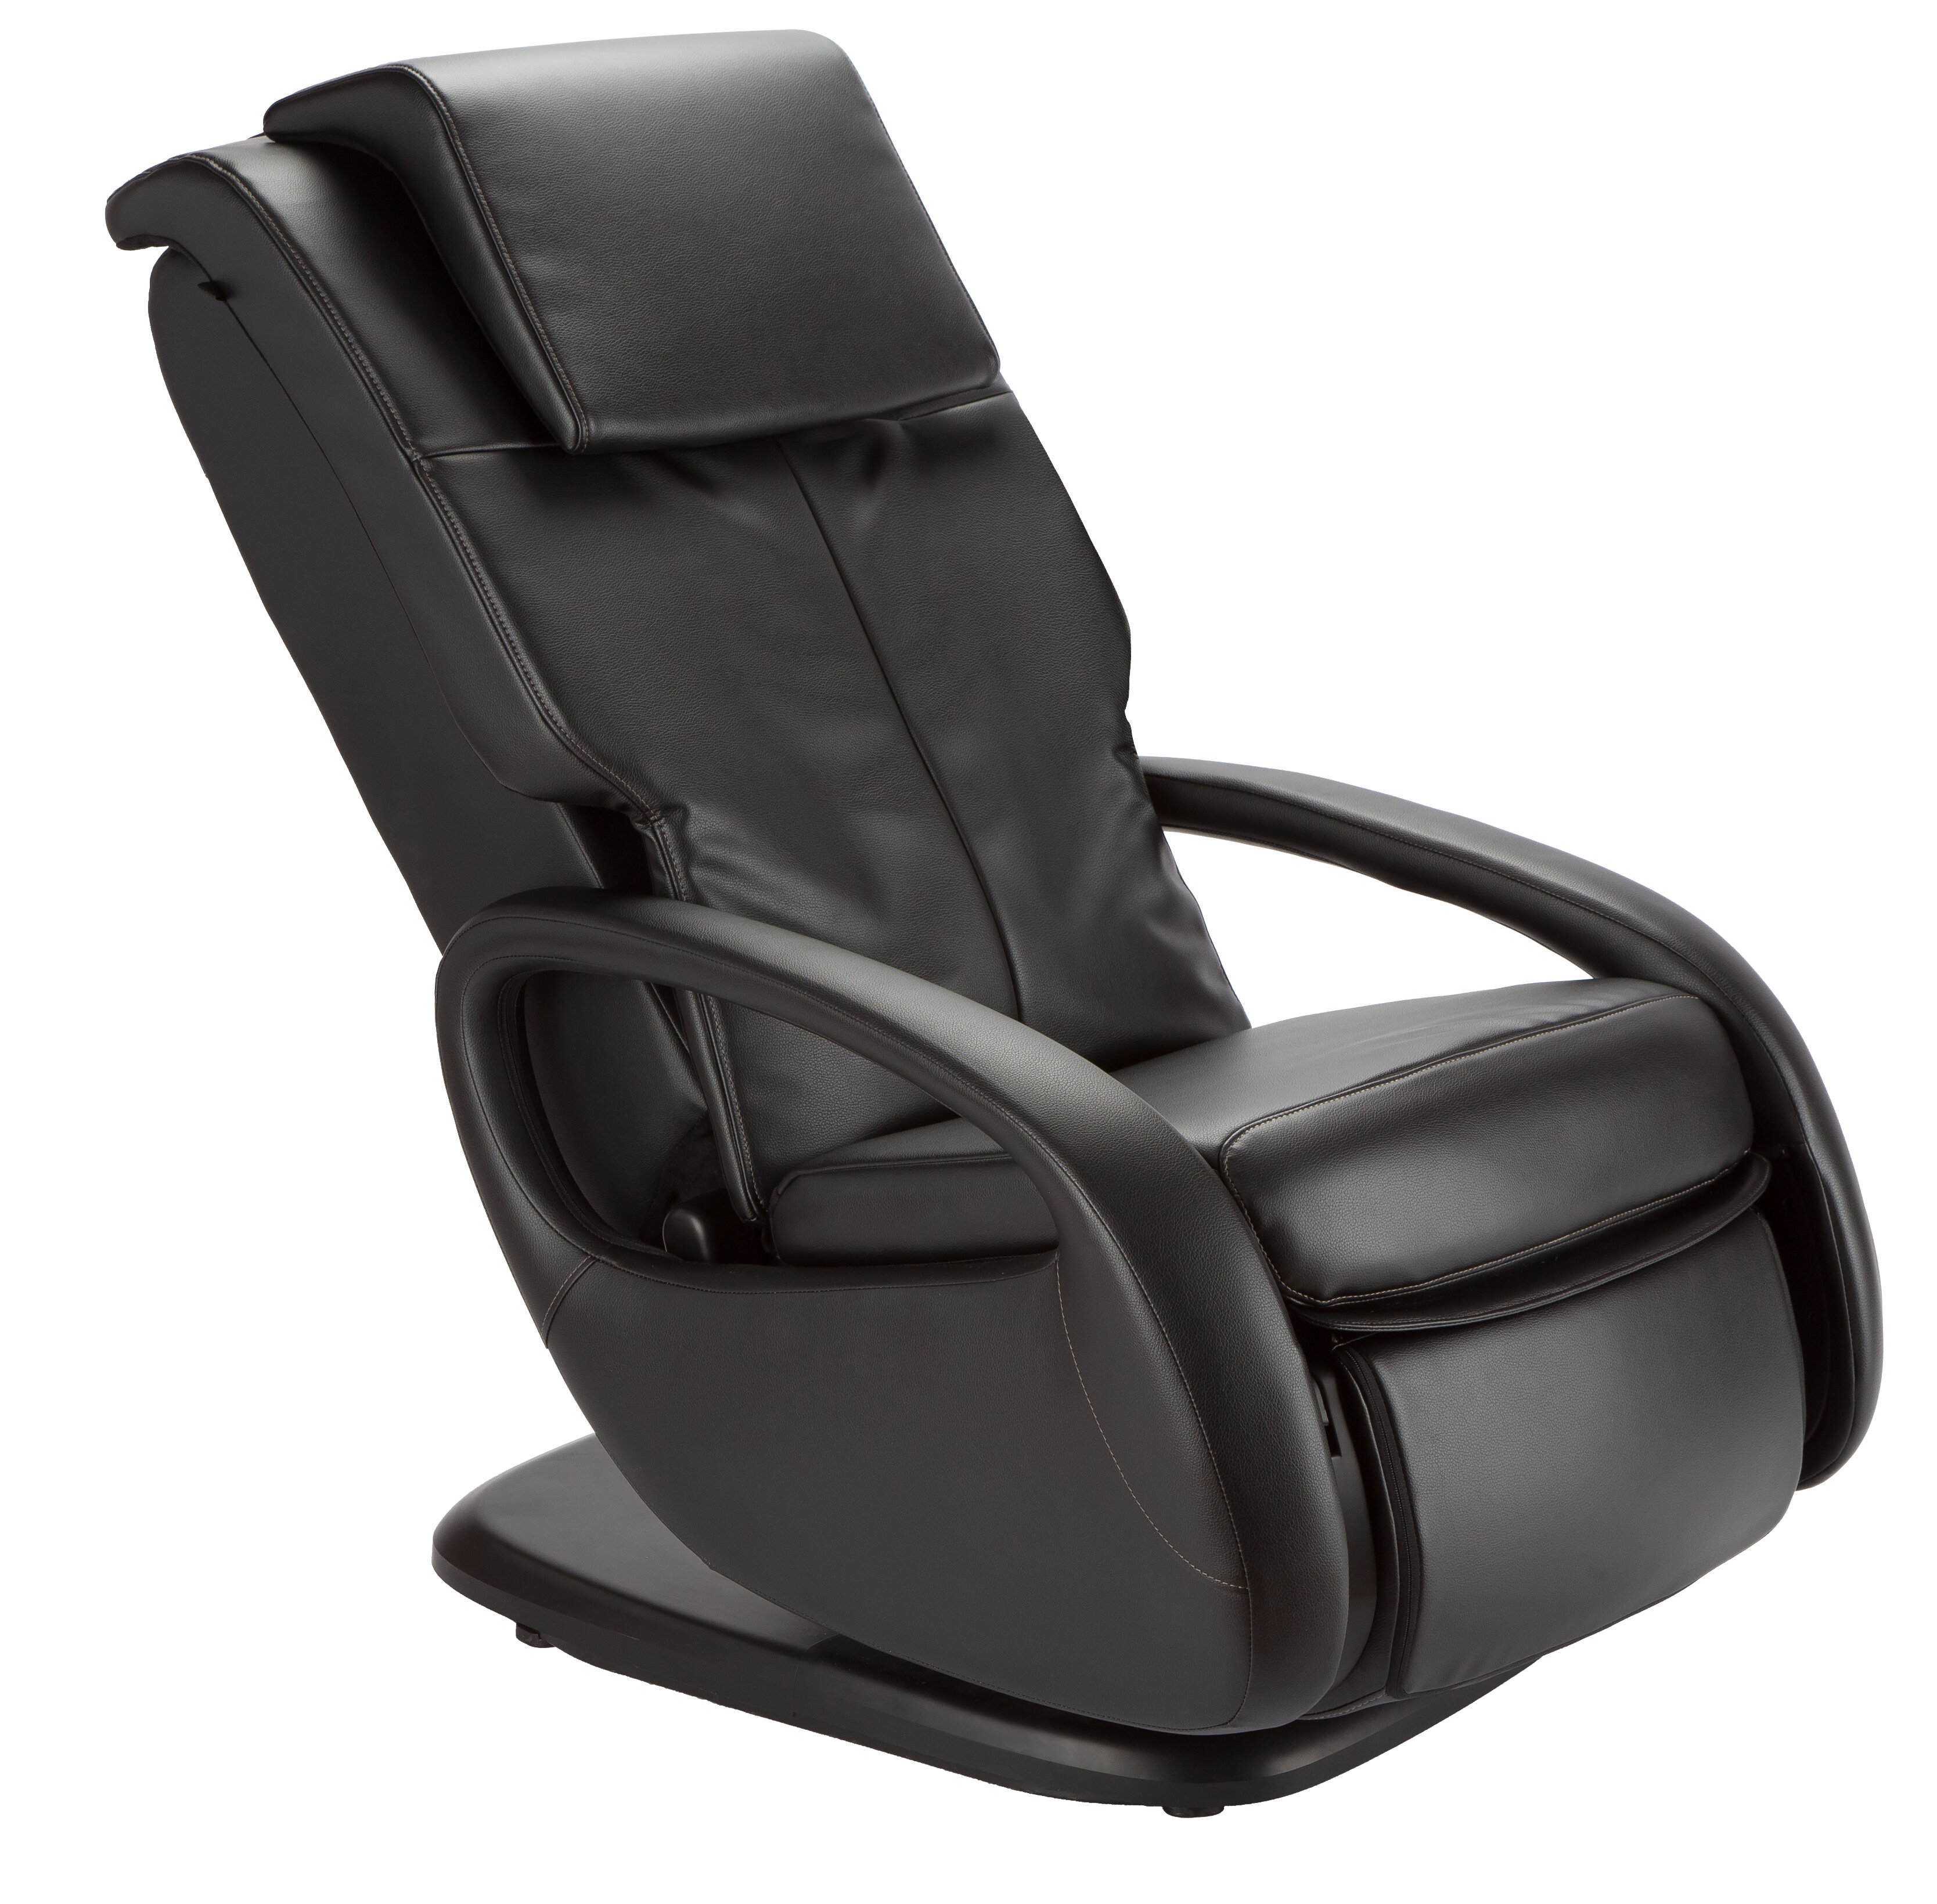 WholeBody® 5.1 Massage Chair - Human Touch®